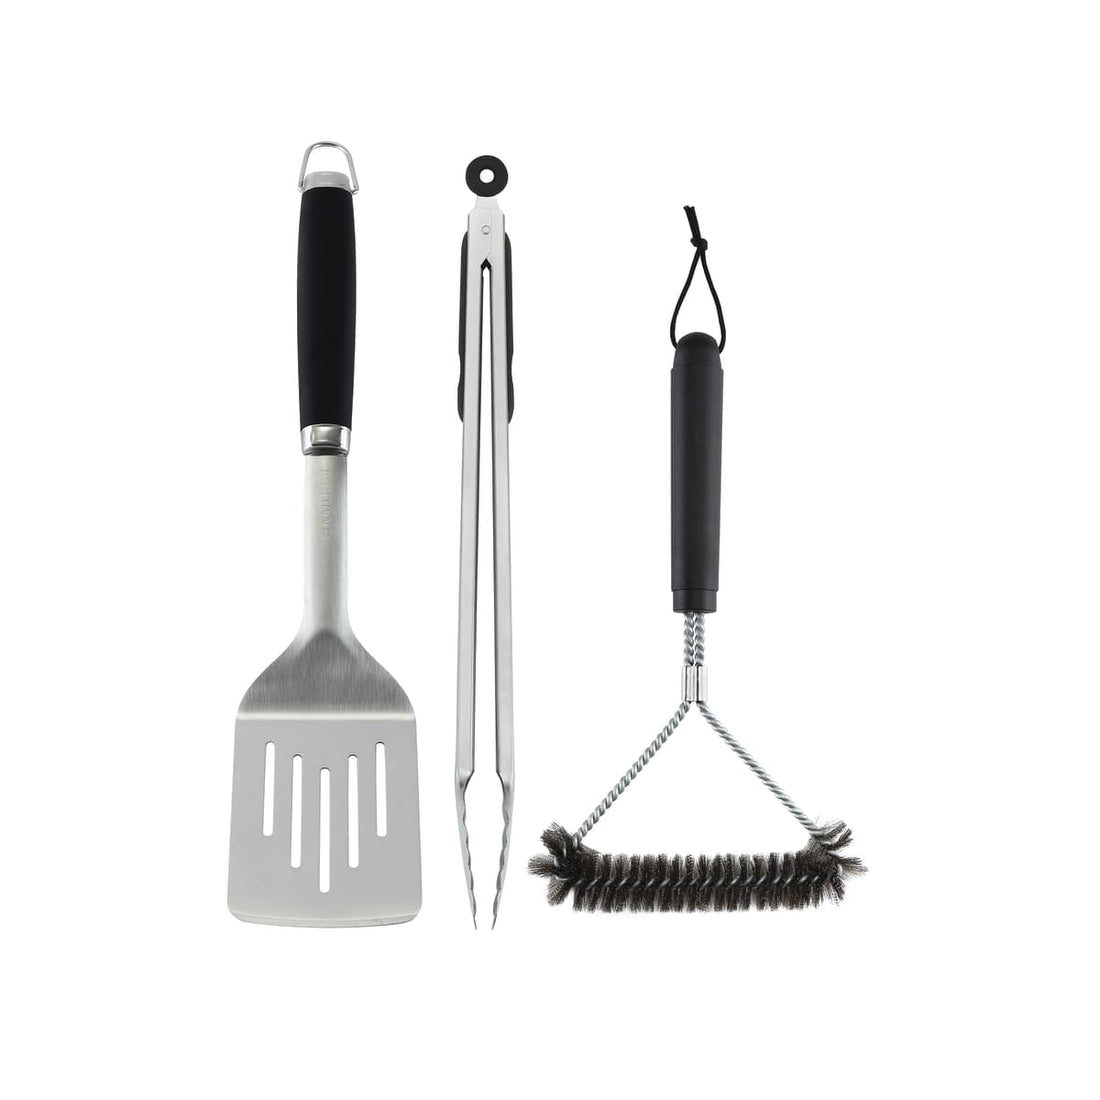 SET 3 NATERIAL STAINLESS STEEL BARBECUE ACCESSORIES - best price from Maltashopper.com BR500009592